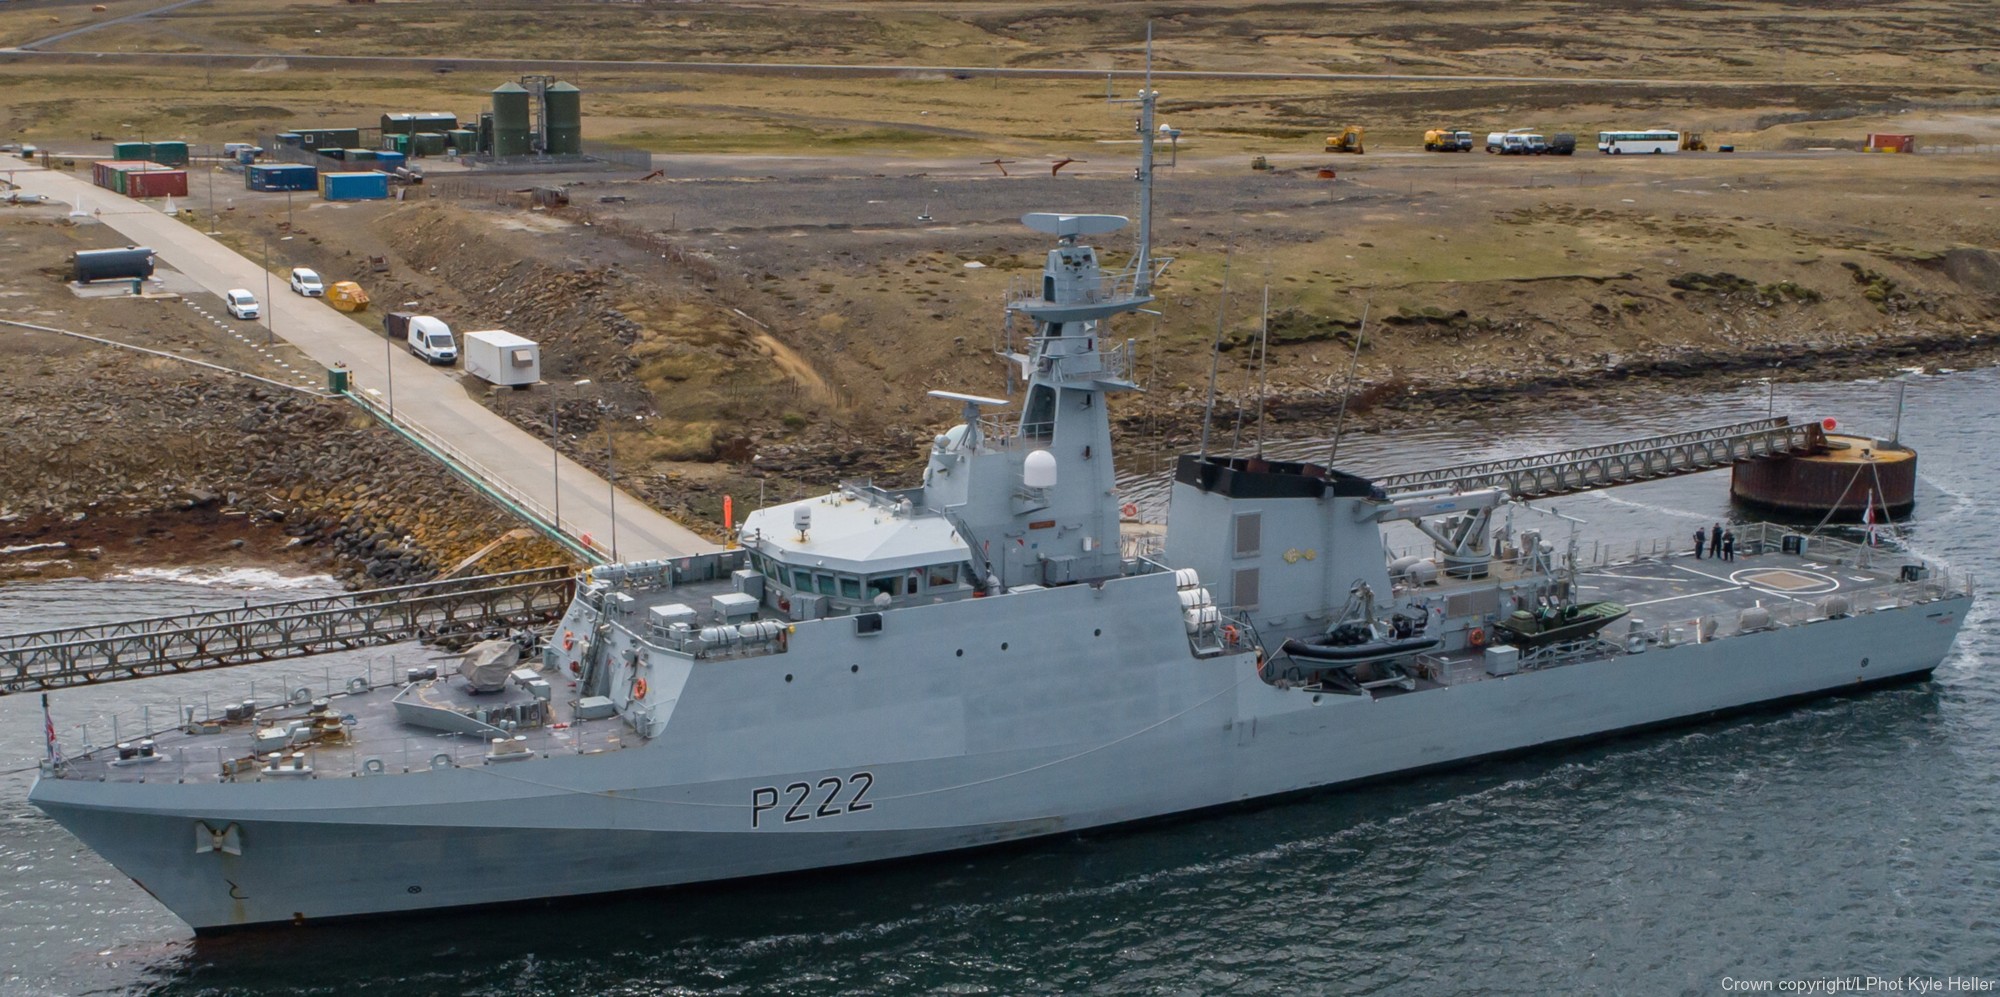 p-222 hms forth river class offshore patrol vessel opv royal navy 29